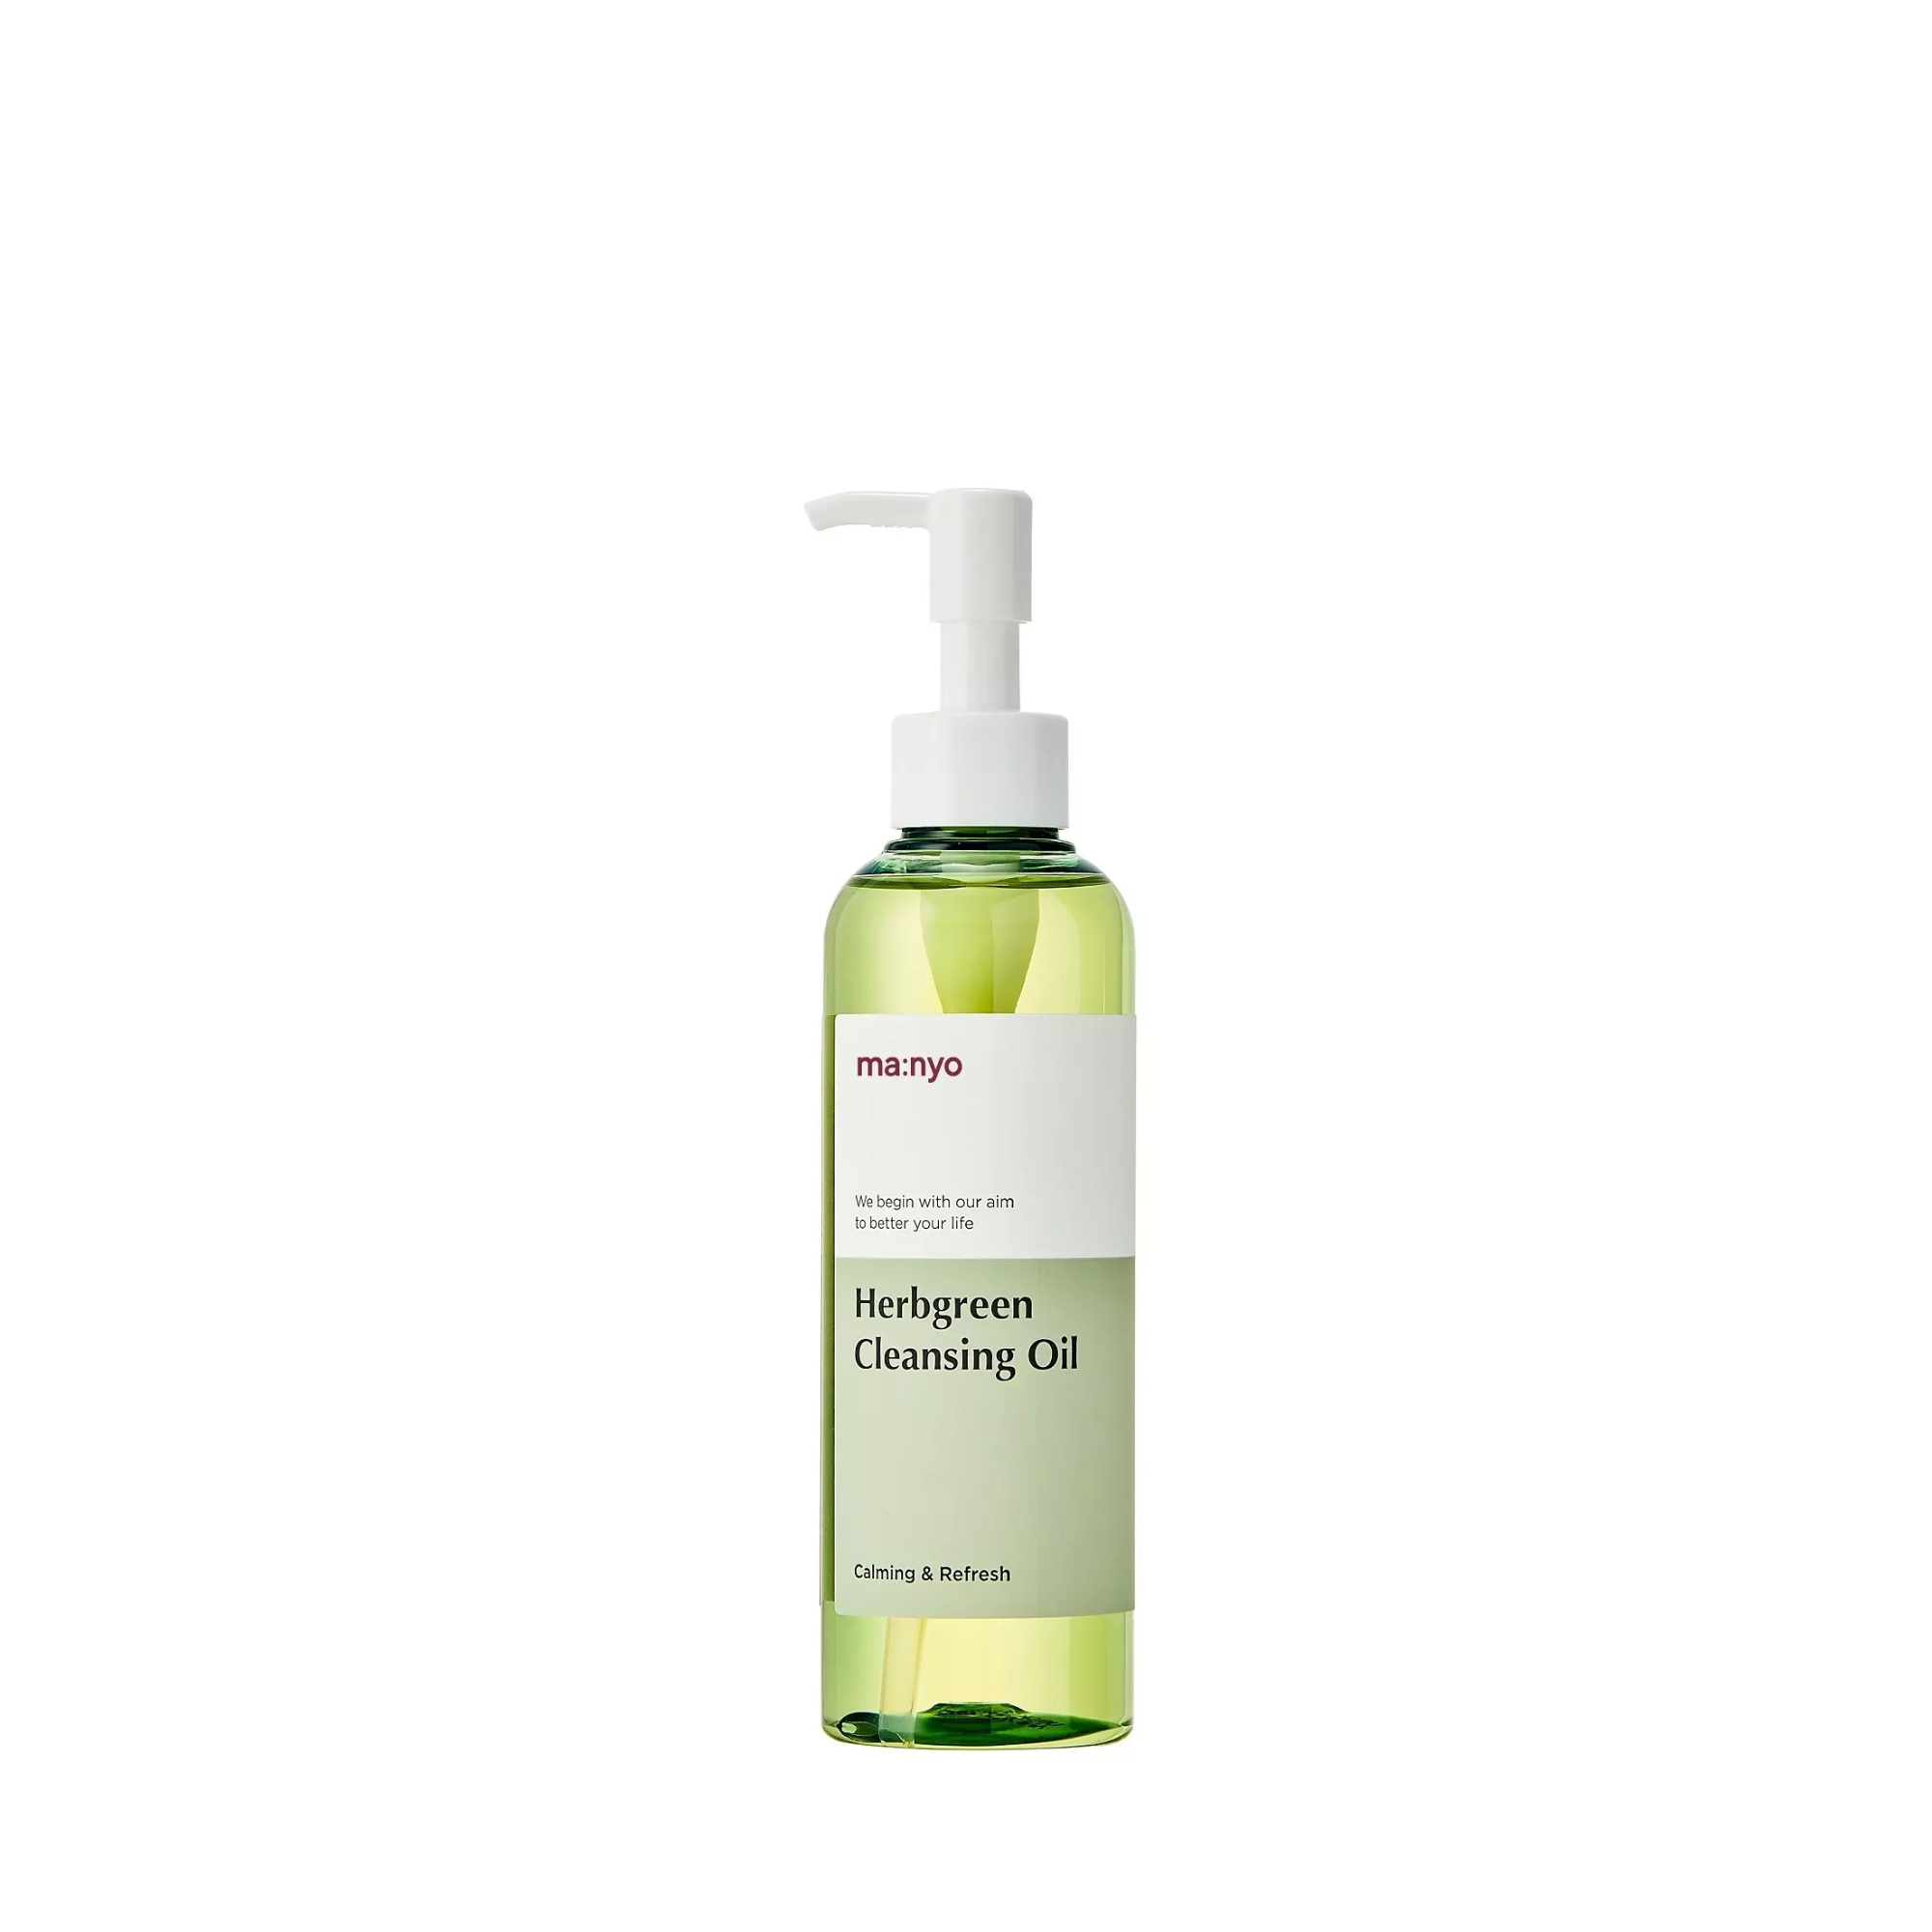 Hydrophilic cleansing oil with herbal extracts by Manyo (Manyo Herbgreen Cleansing Oil)